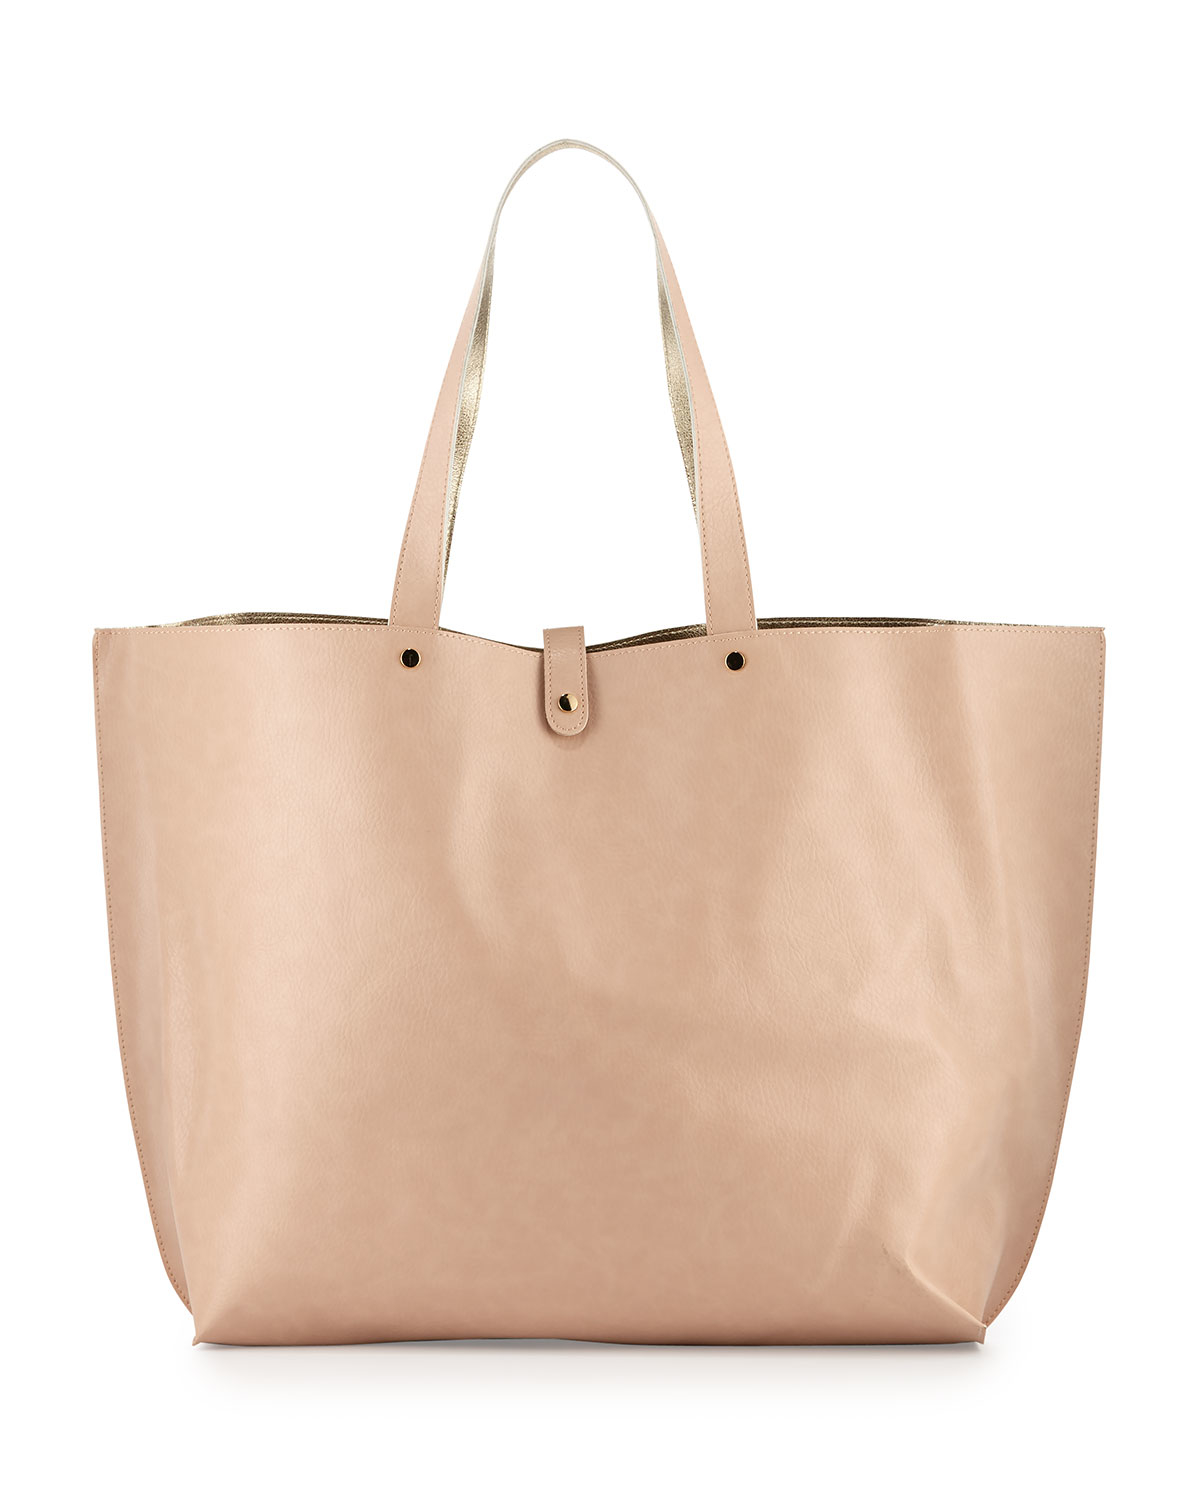 Lyst - Neiman Marcus Large Pebbled Faux-leather Tote Bag in Pink